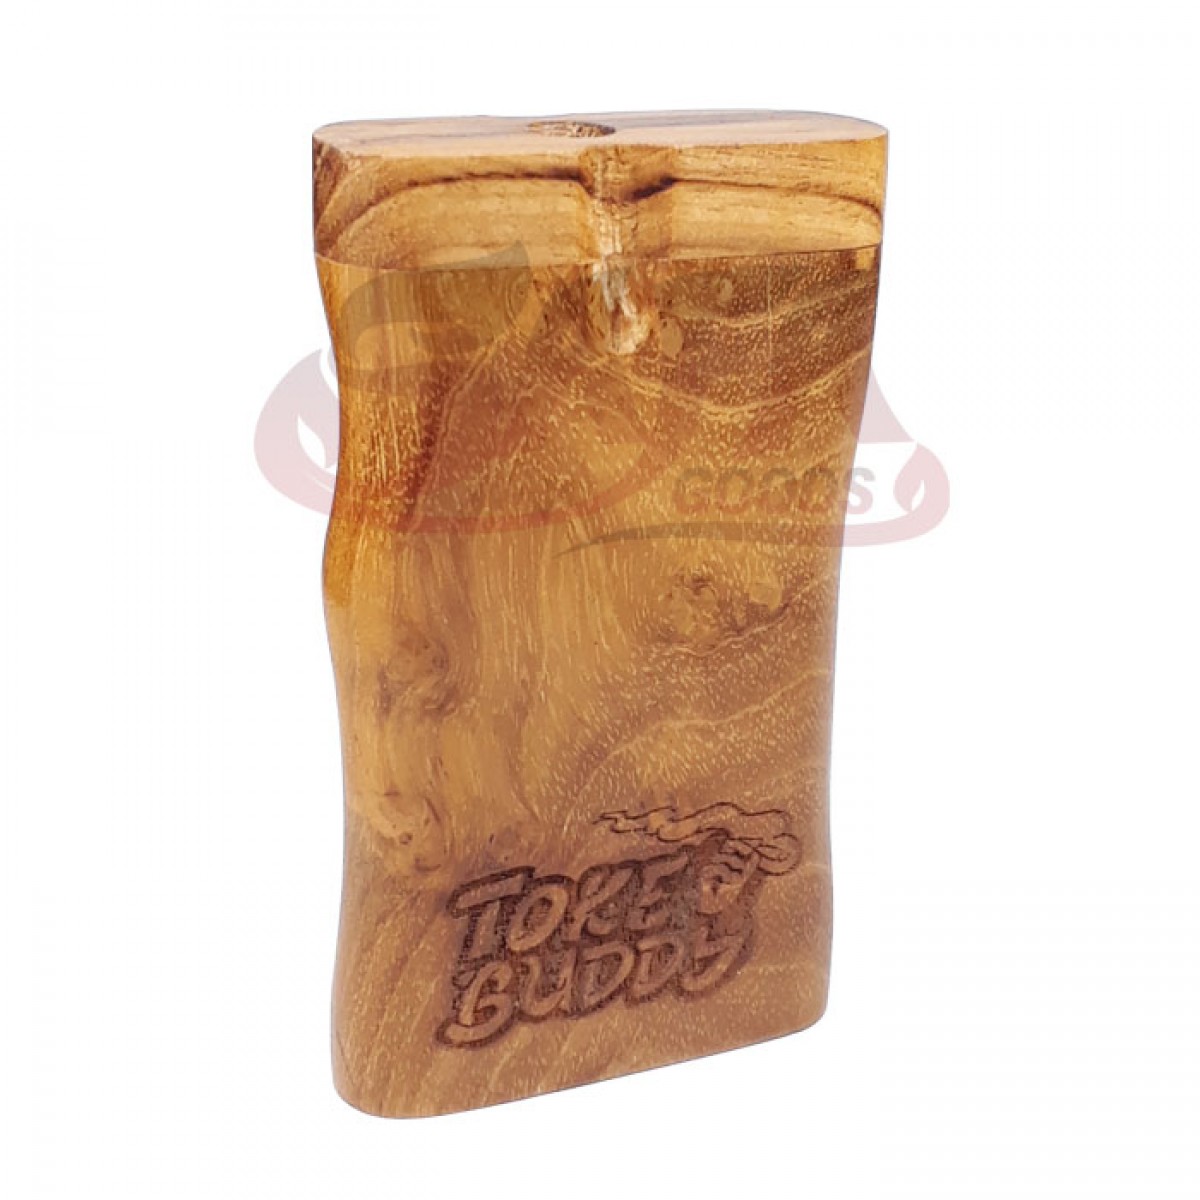 Jay's Toke Buddy - 4 Inch Wooden Dugouts